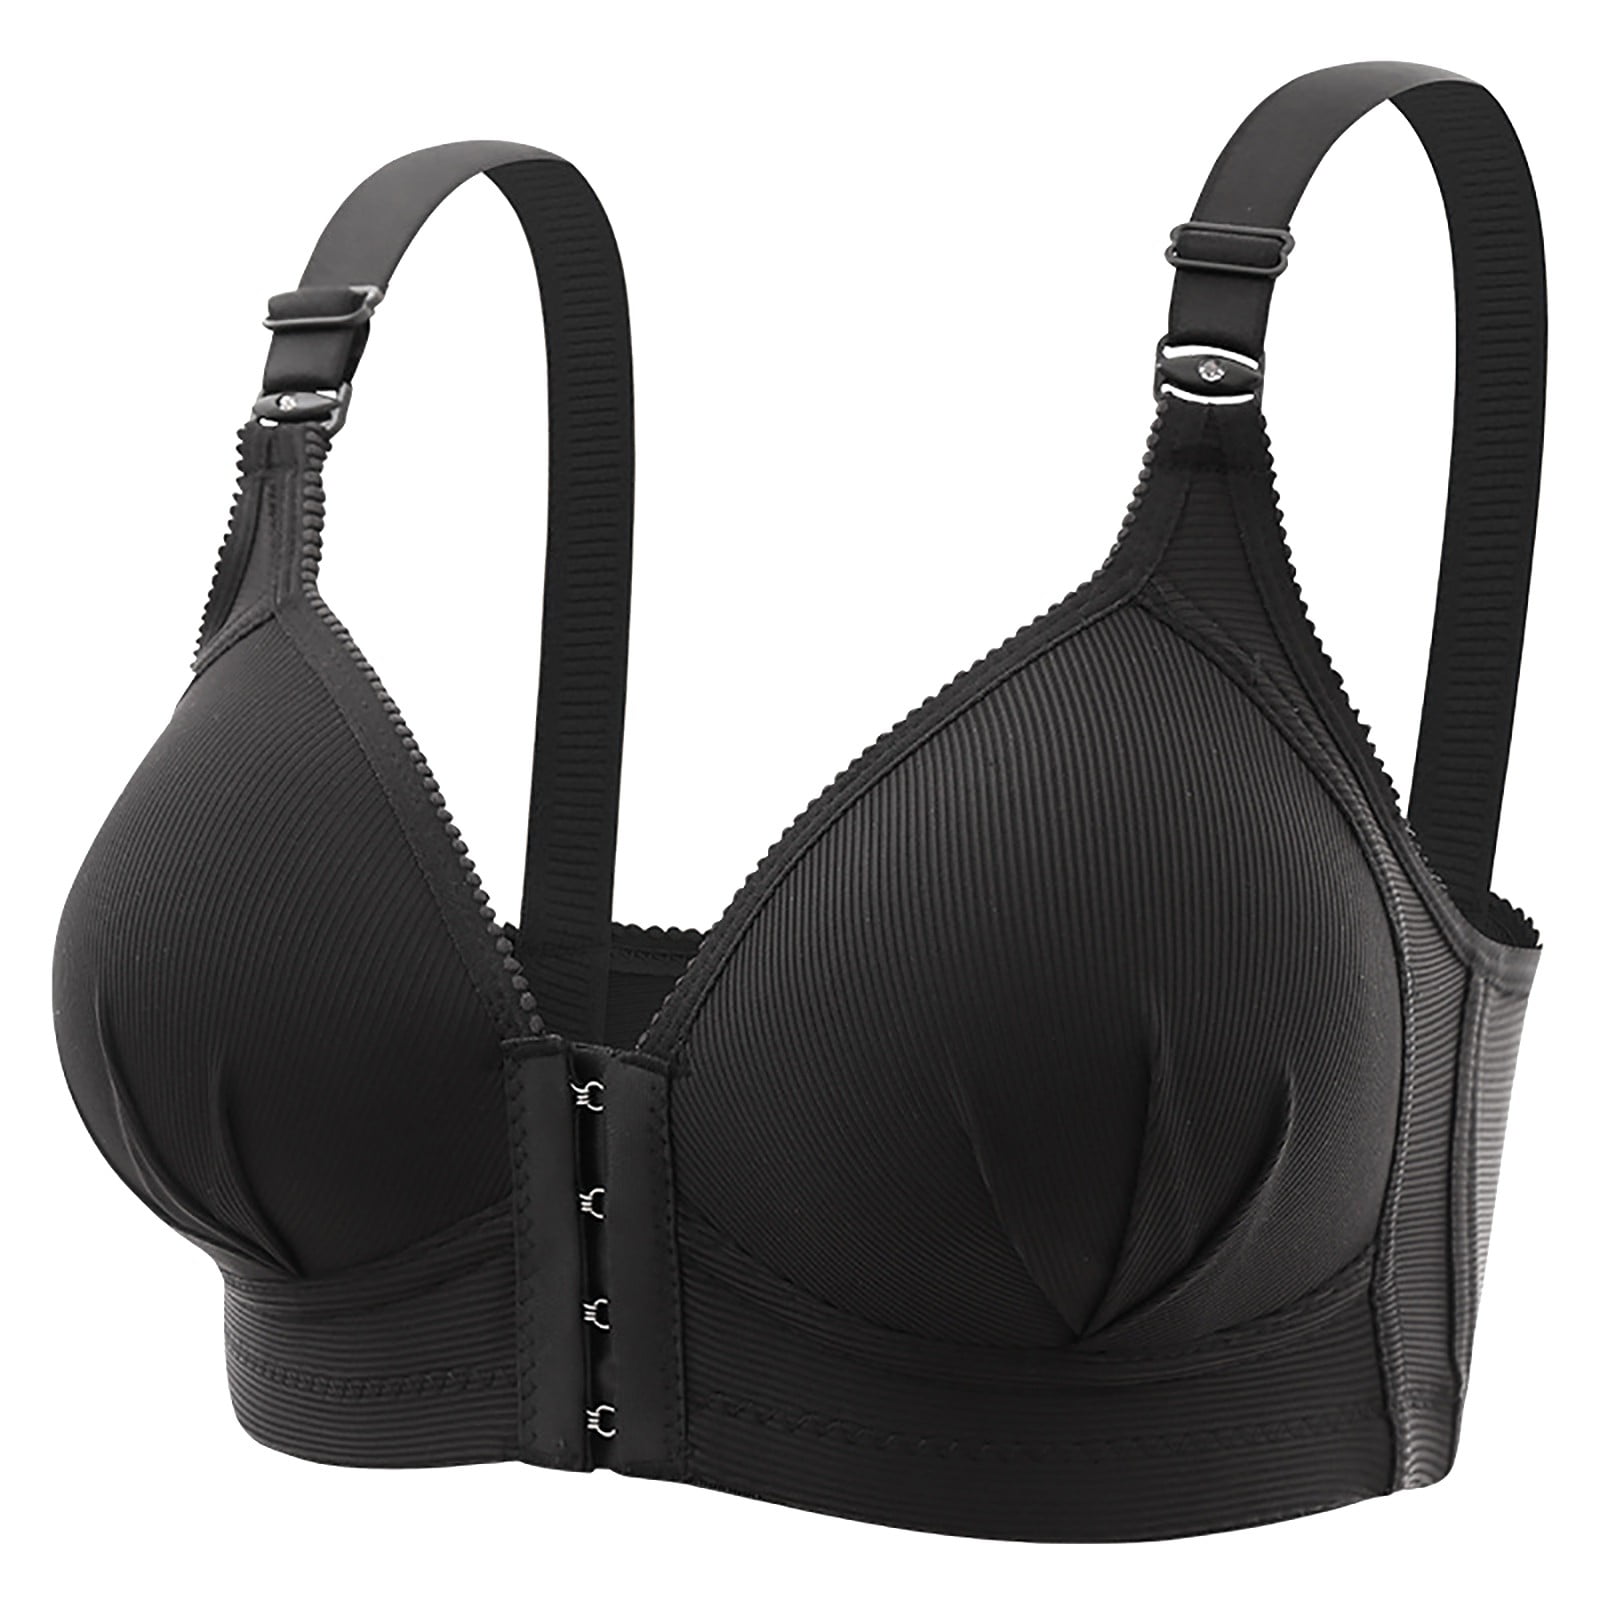 Buy online Black Color Block Sports Bra from lingerie for Women by Madam  for ₹249 at 78% off